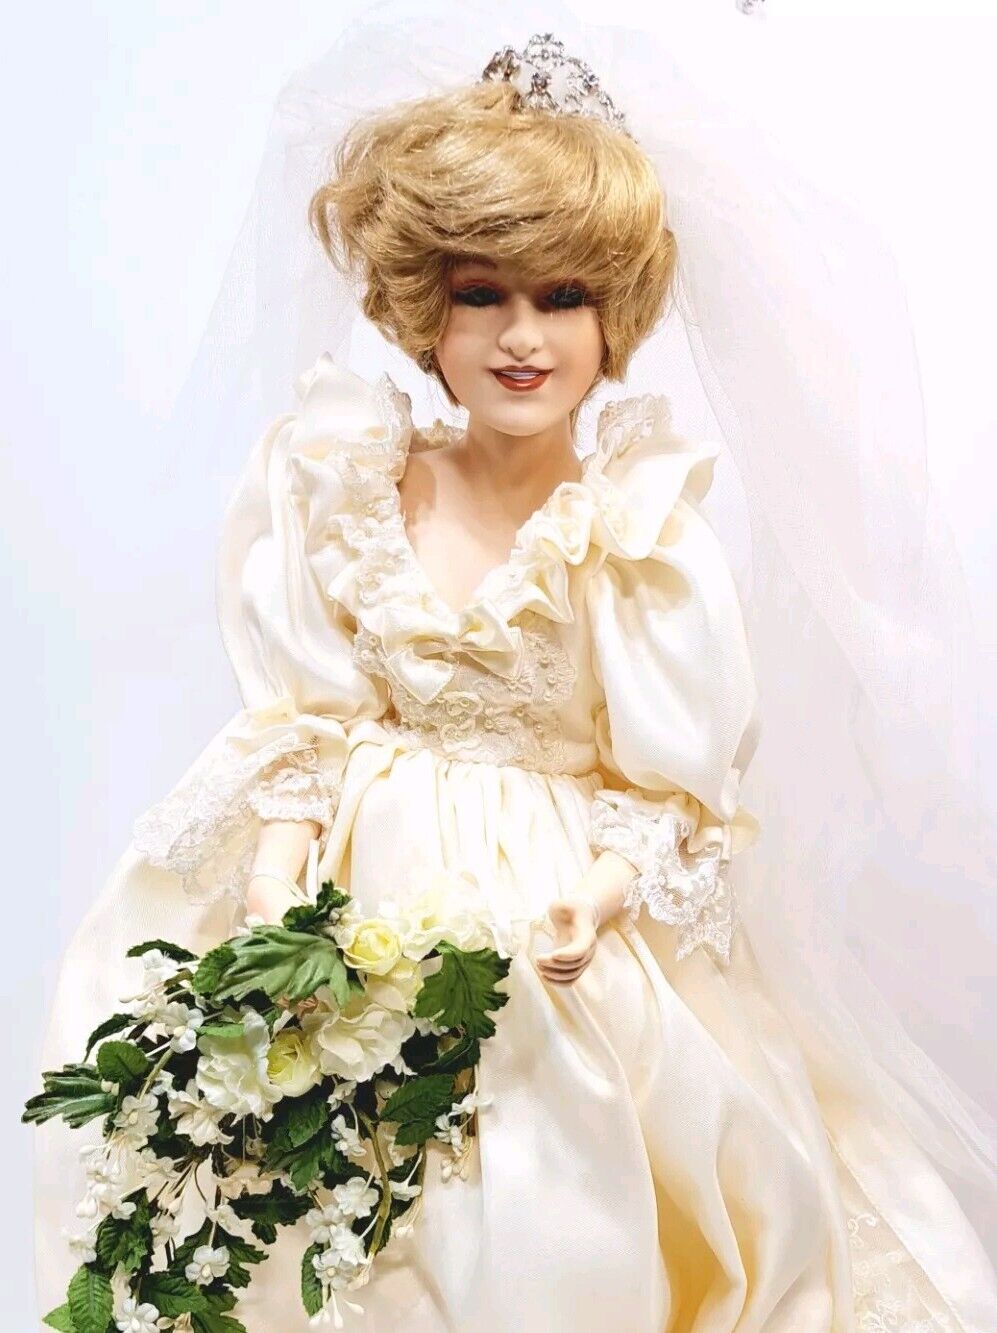 The People's Princess Diana Royal Wedding Day Edition Porcelain Doll  Vintage 